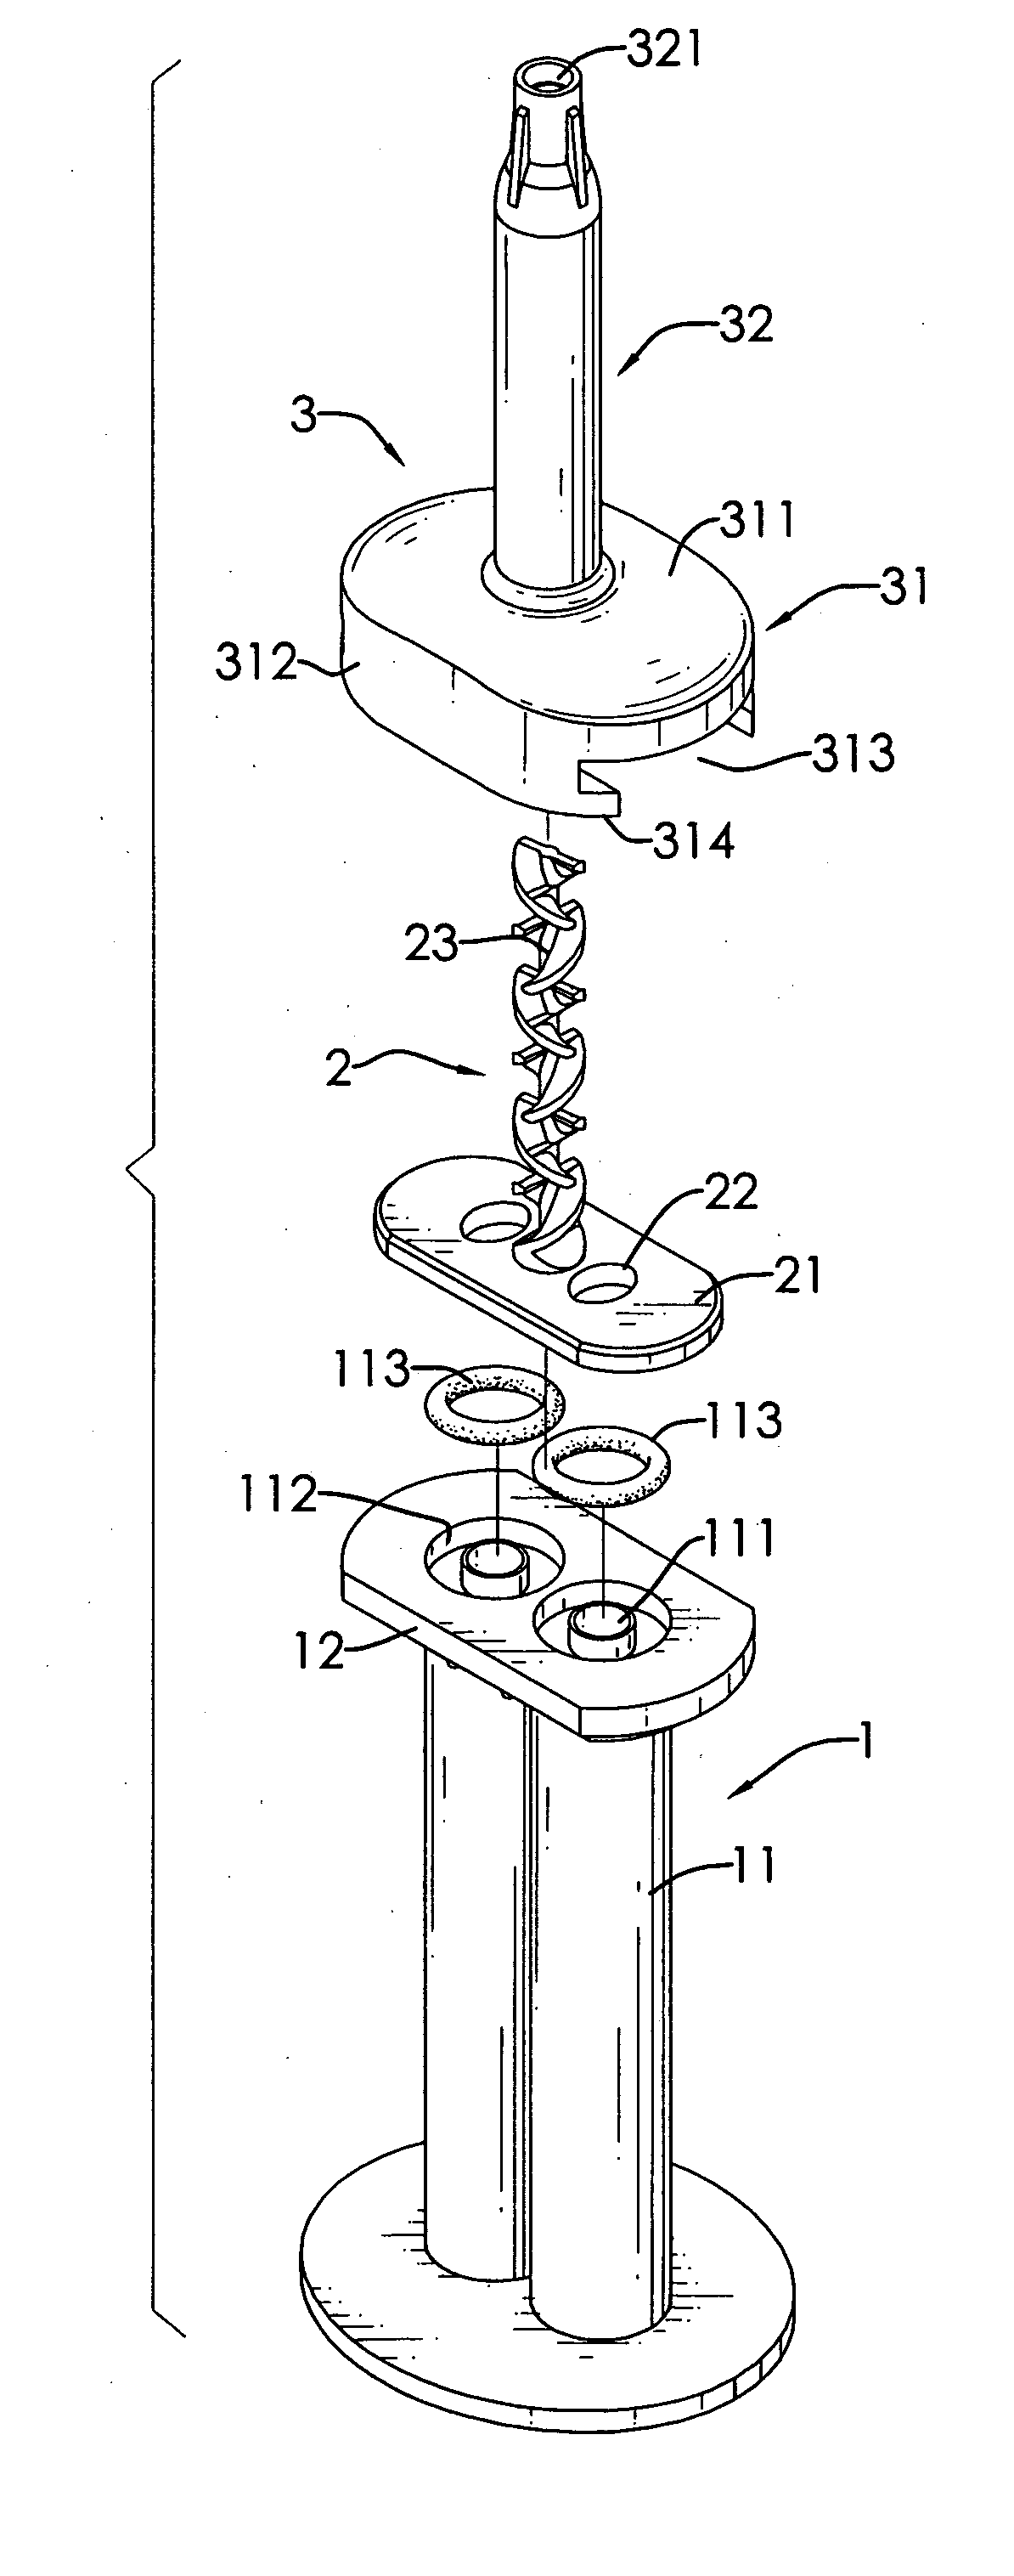 Securing device for a mixer to allow dynamic communication between a mixer housing and a mixer inlet portion of the mixer